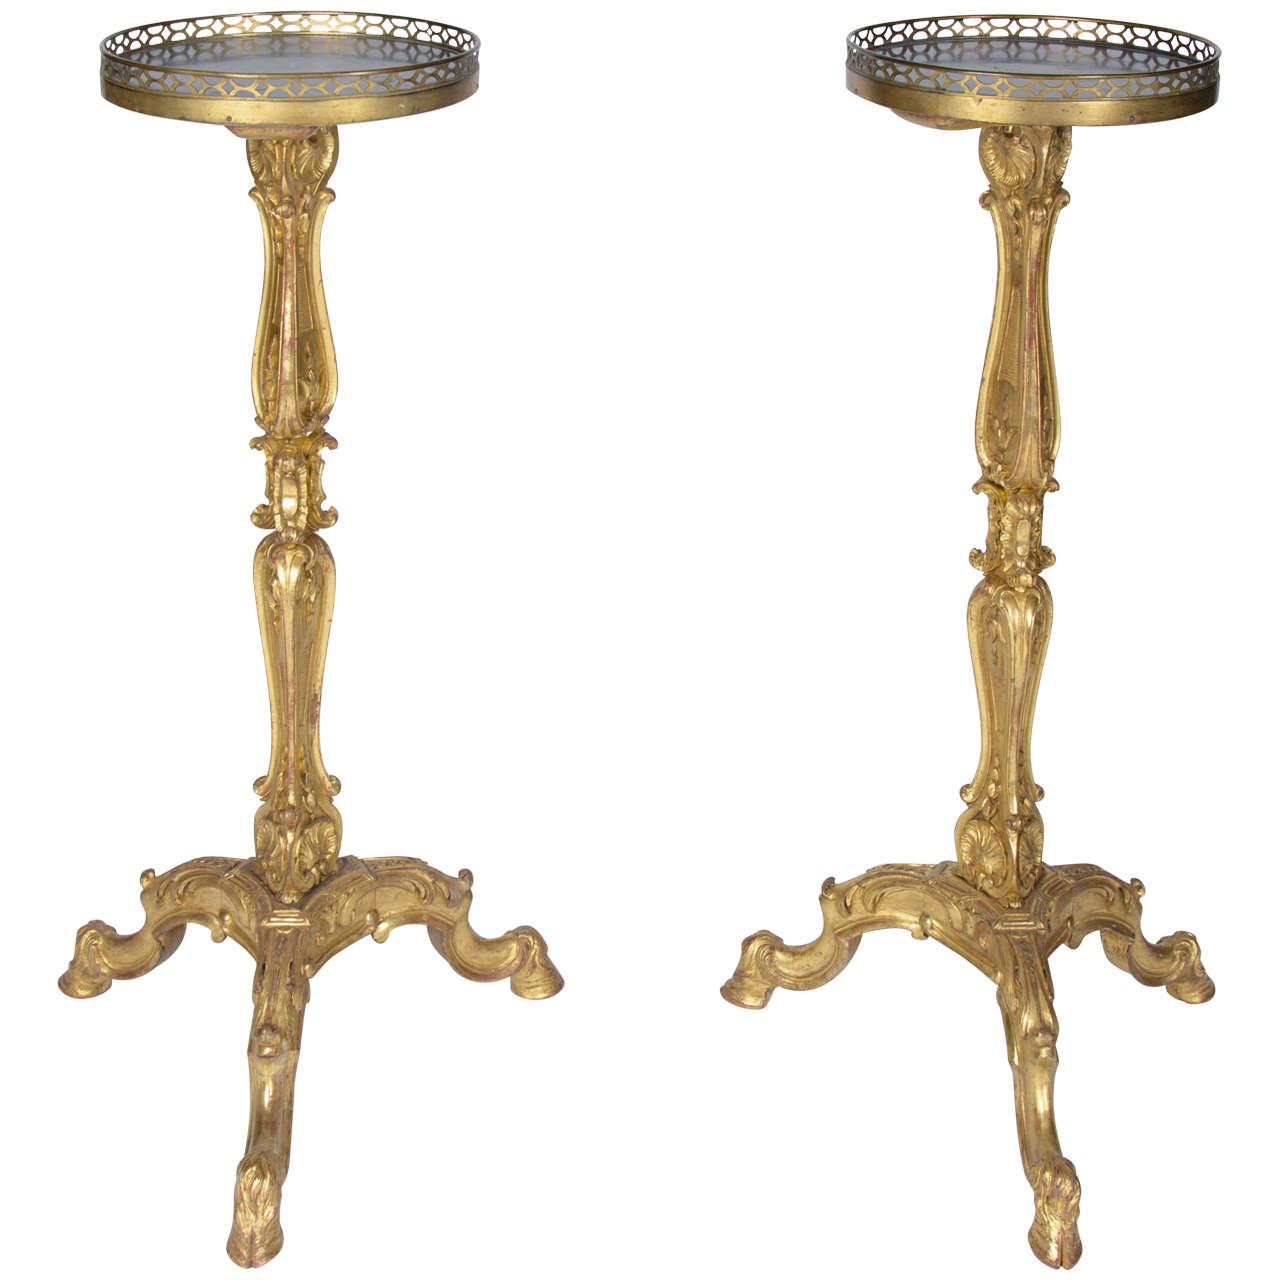 A pair of 19th century Torcheres